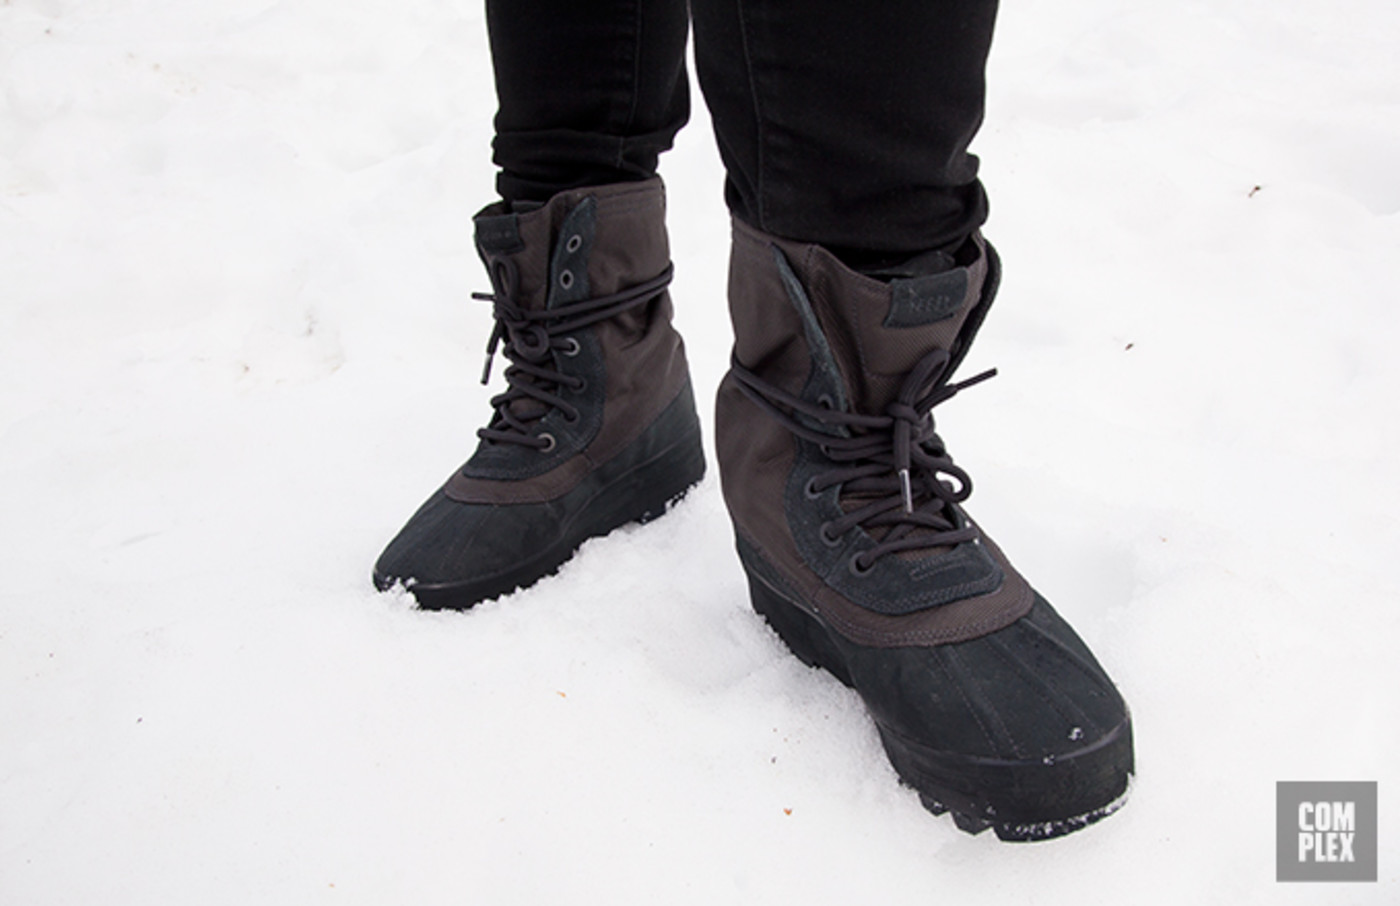 Yeezy Boots in the Snow 